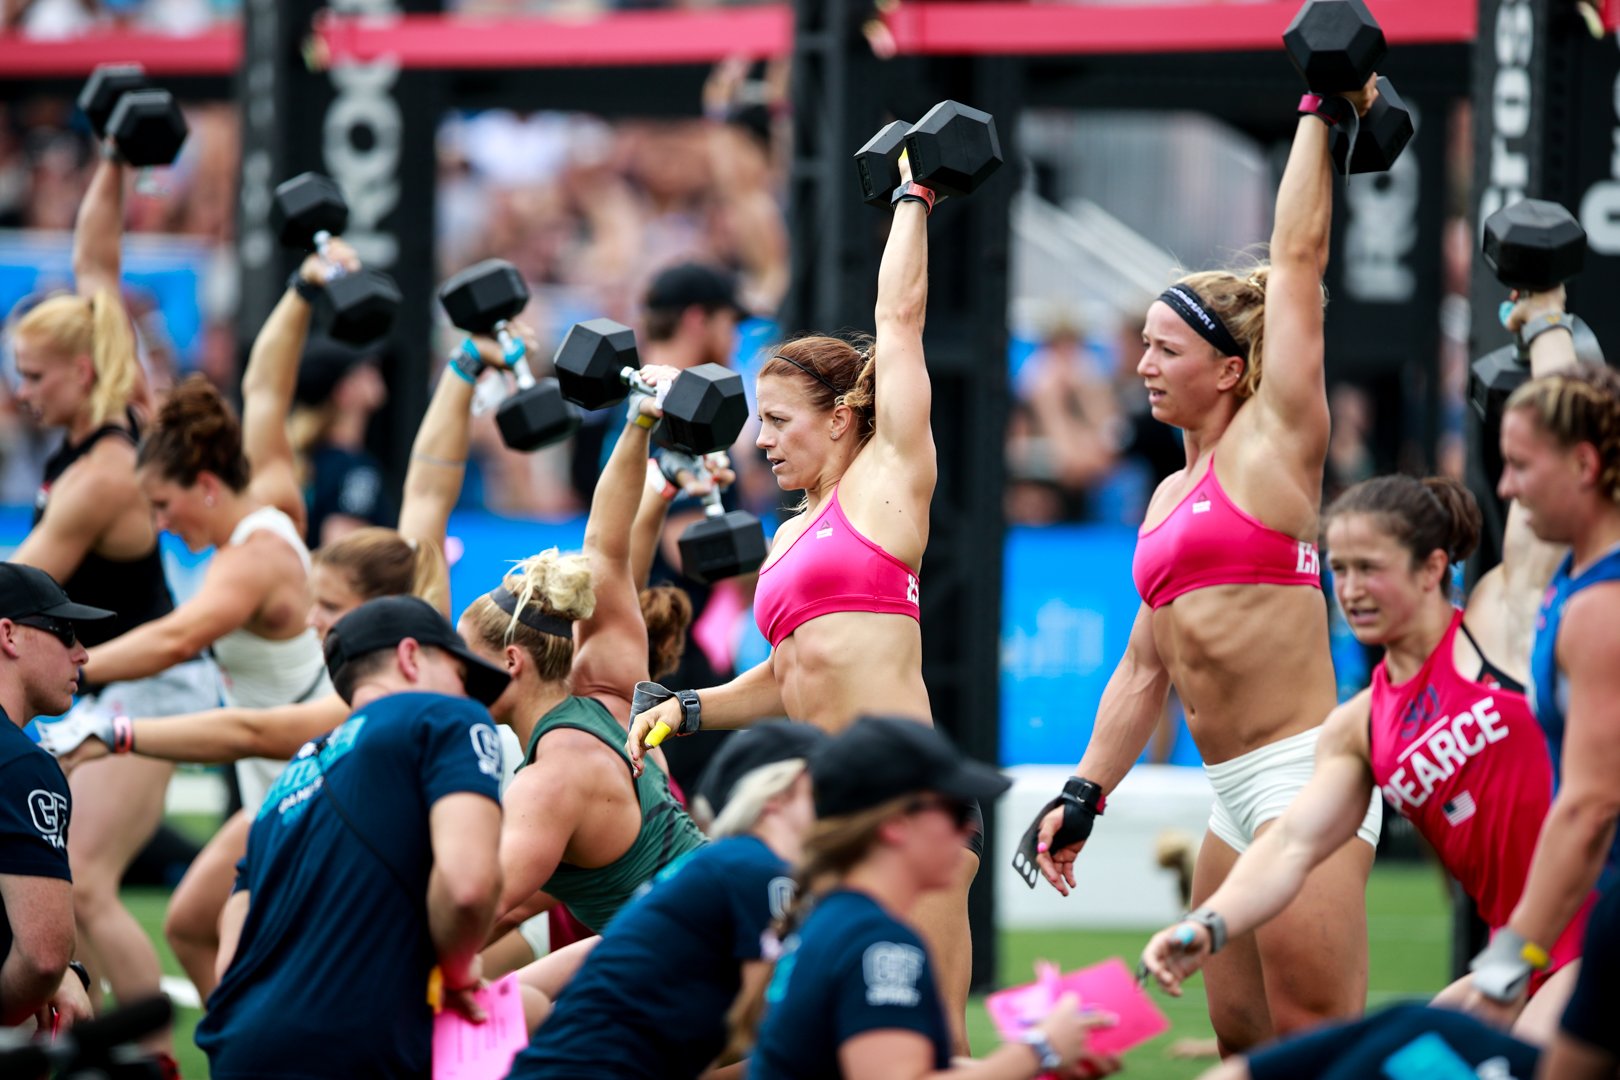 The CrossFit Games on Twitter.